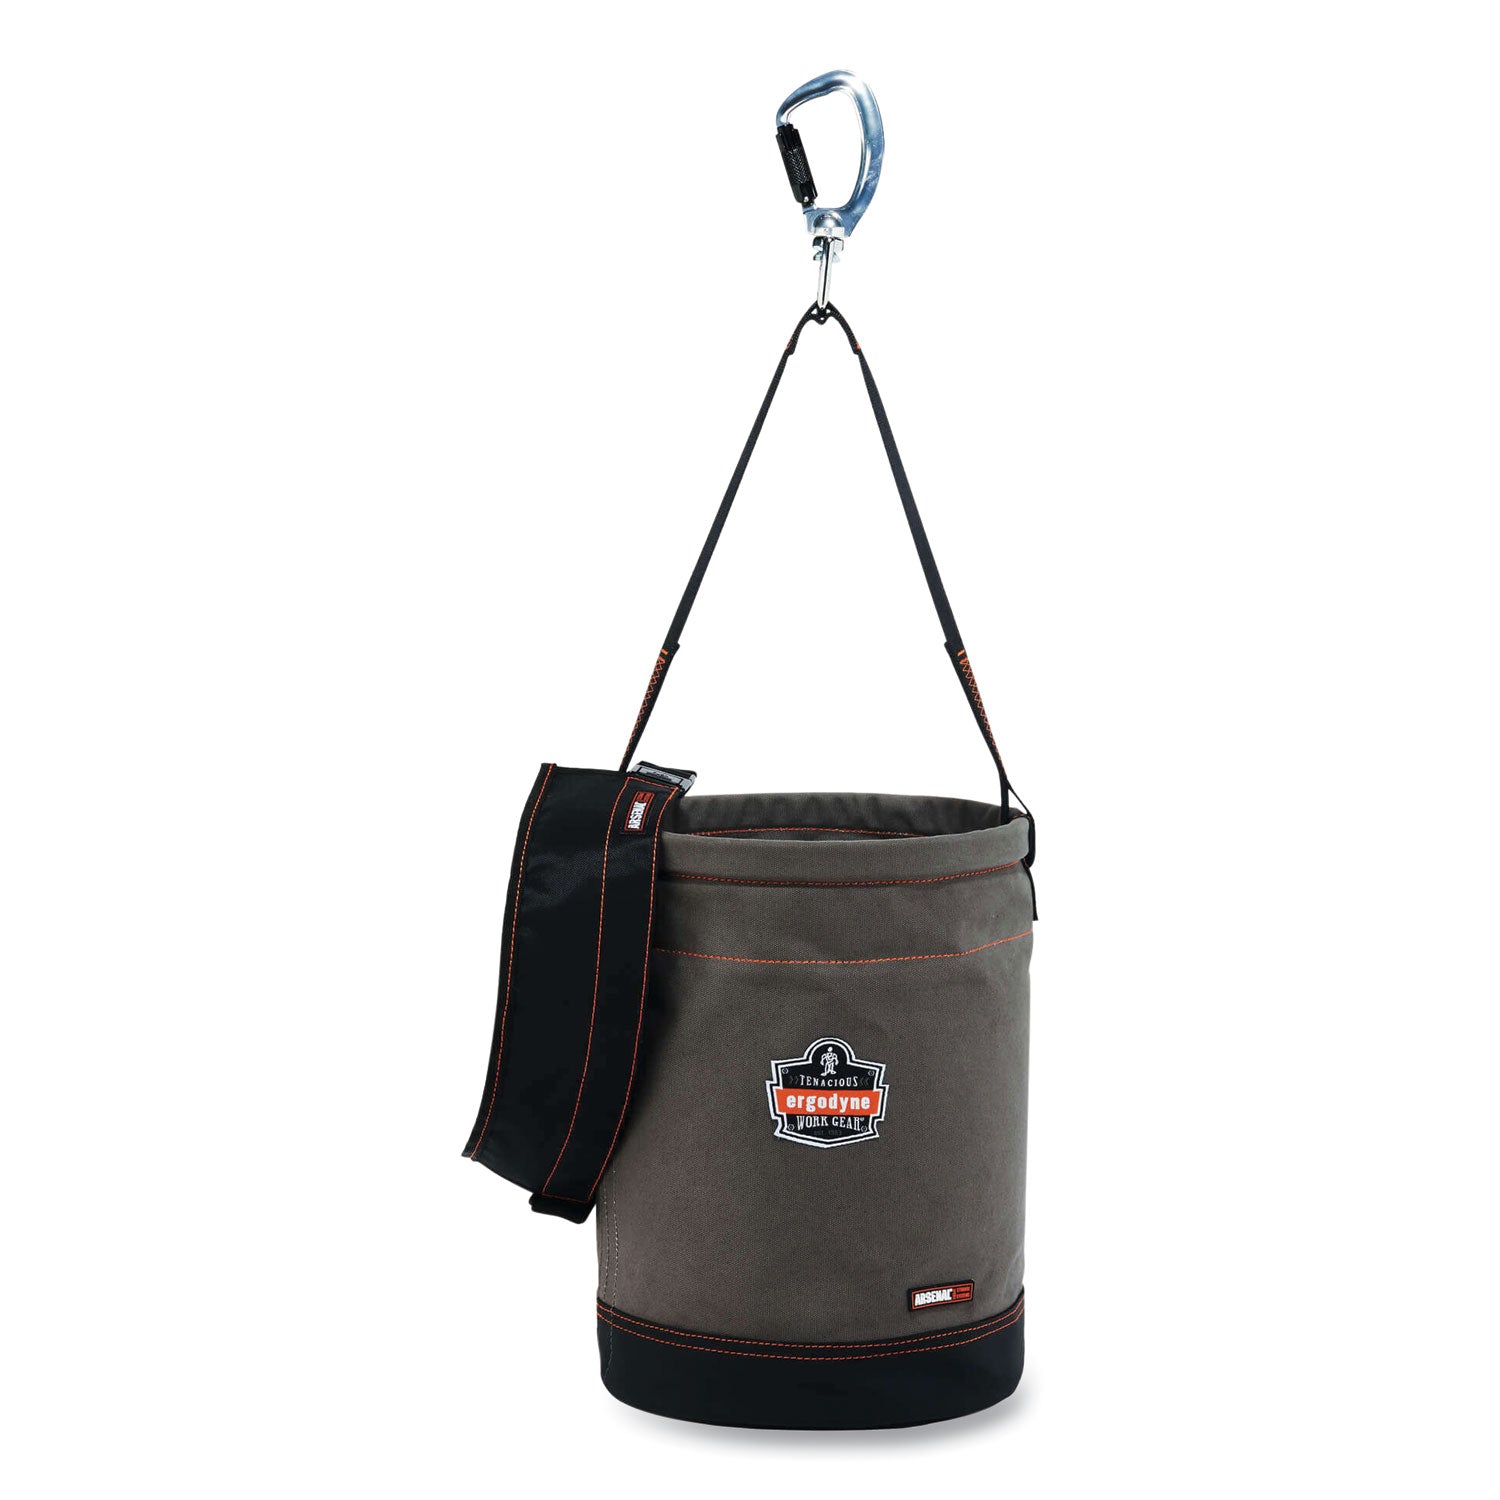 arsenal-5940t-swiveling-carabiner-canvas-hoist-bucket-and-top-150-lb-gray-ships-in-1-3-business-days_ego14840 - 2